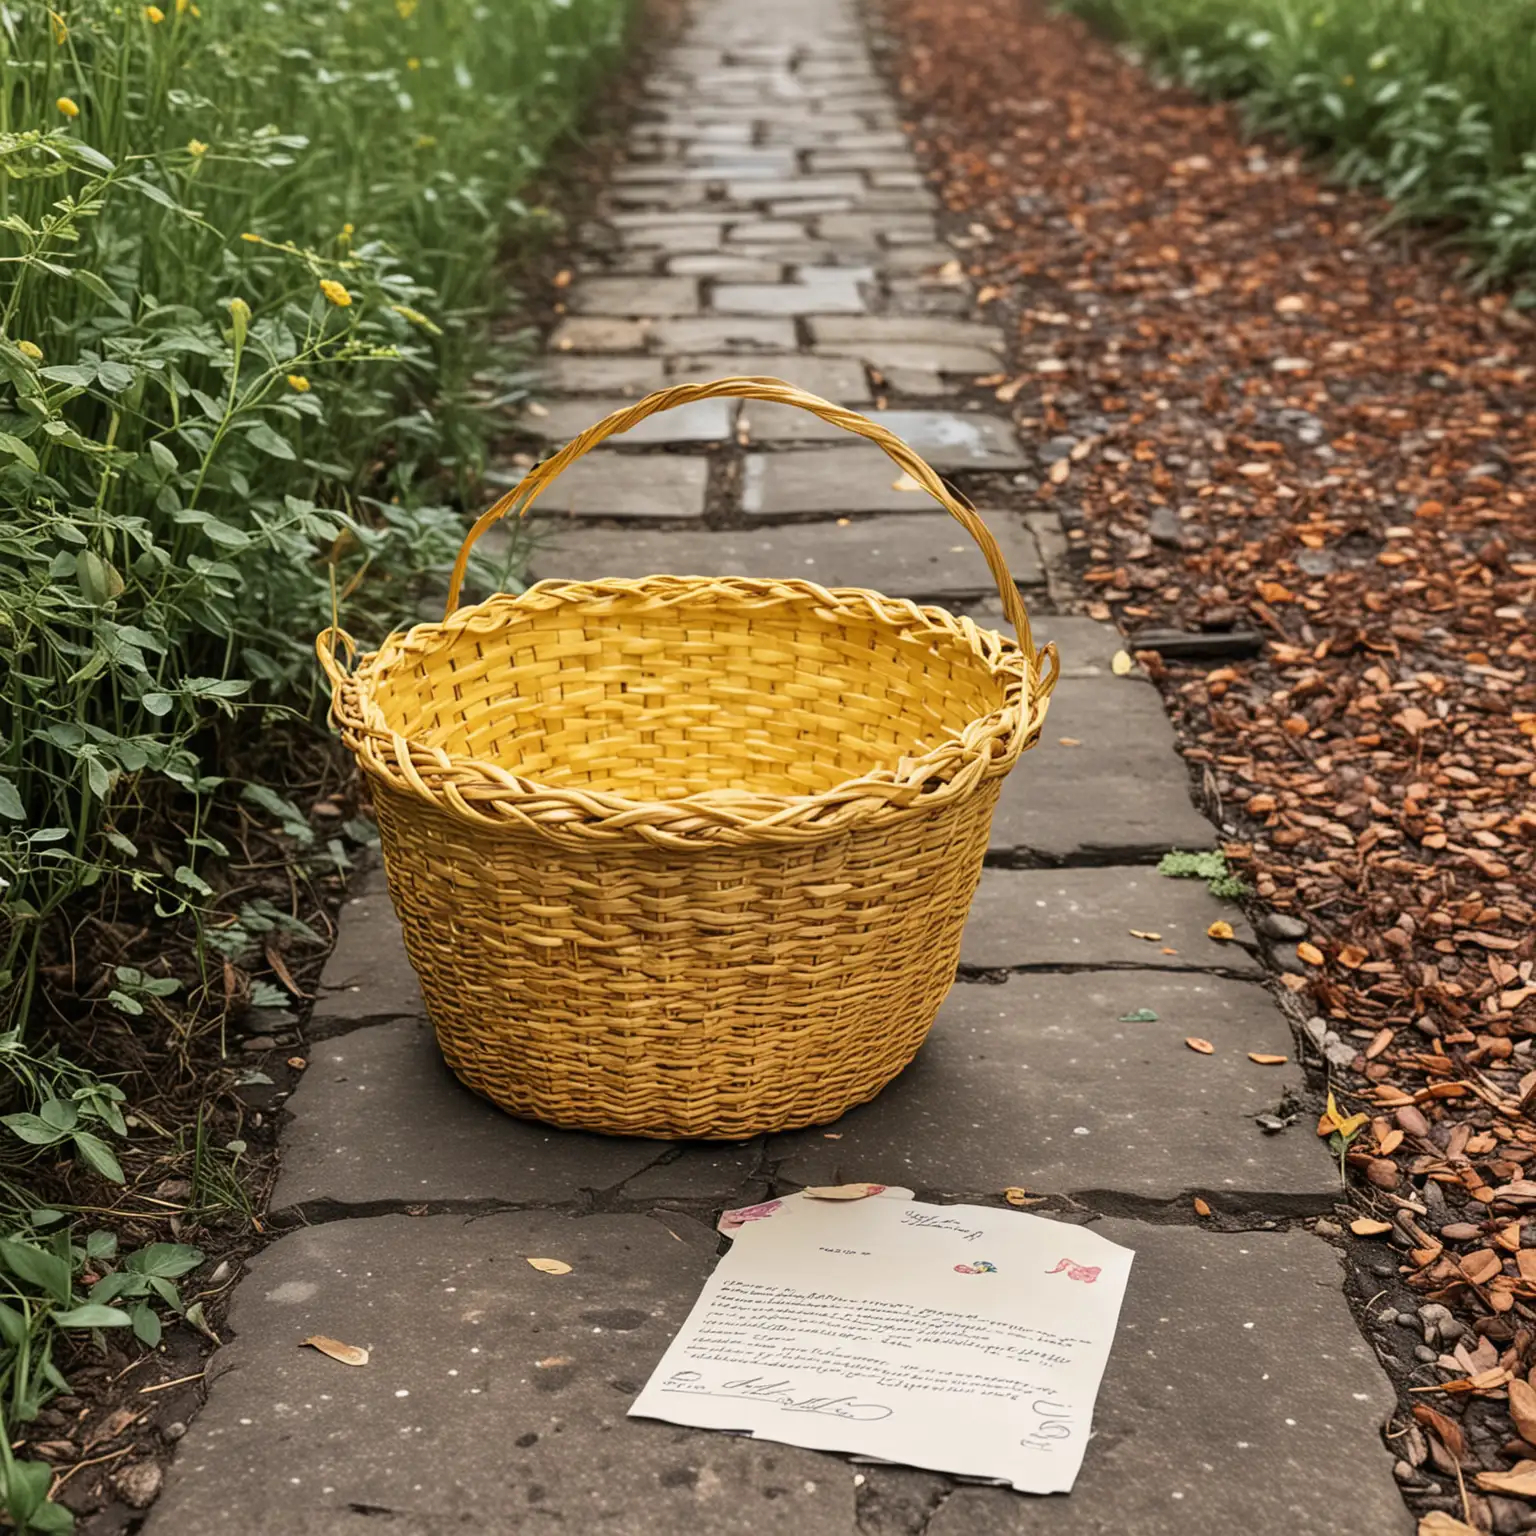 Rustic Basket on Path with Letter in Natural Setting